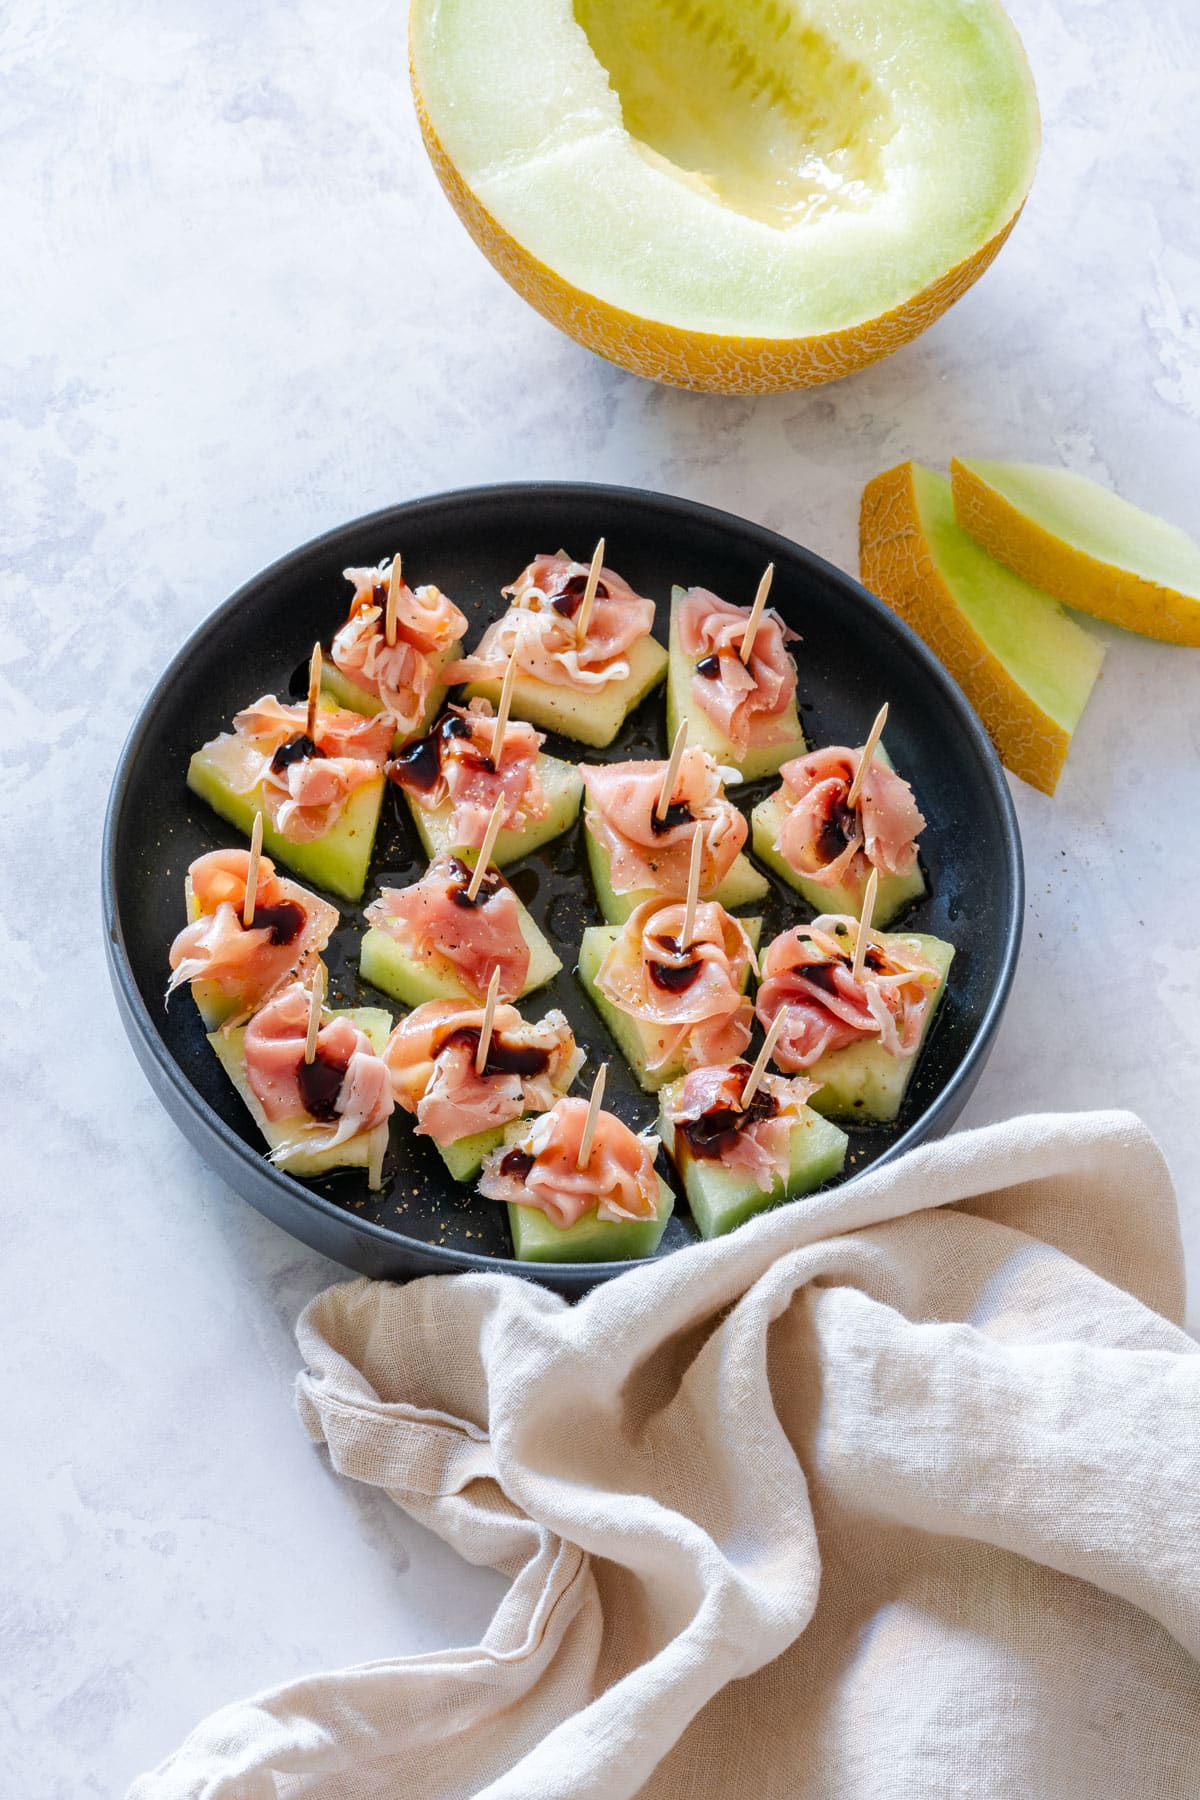 Prosciutto and melon bites for any gathering.